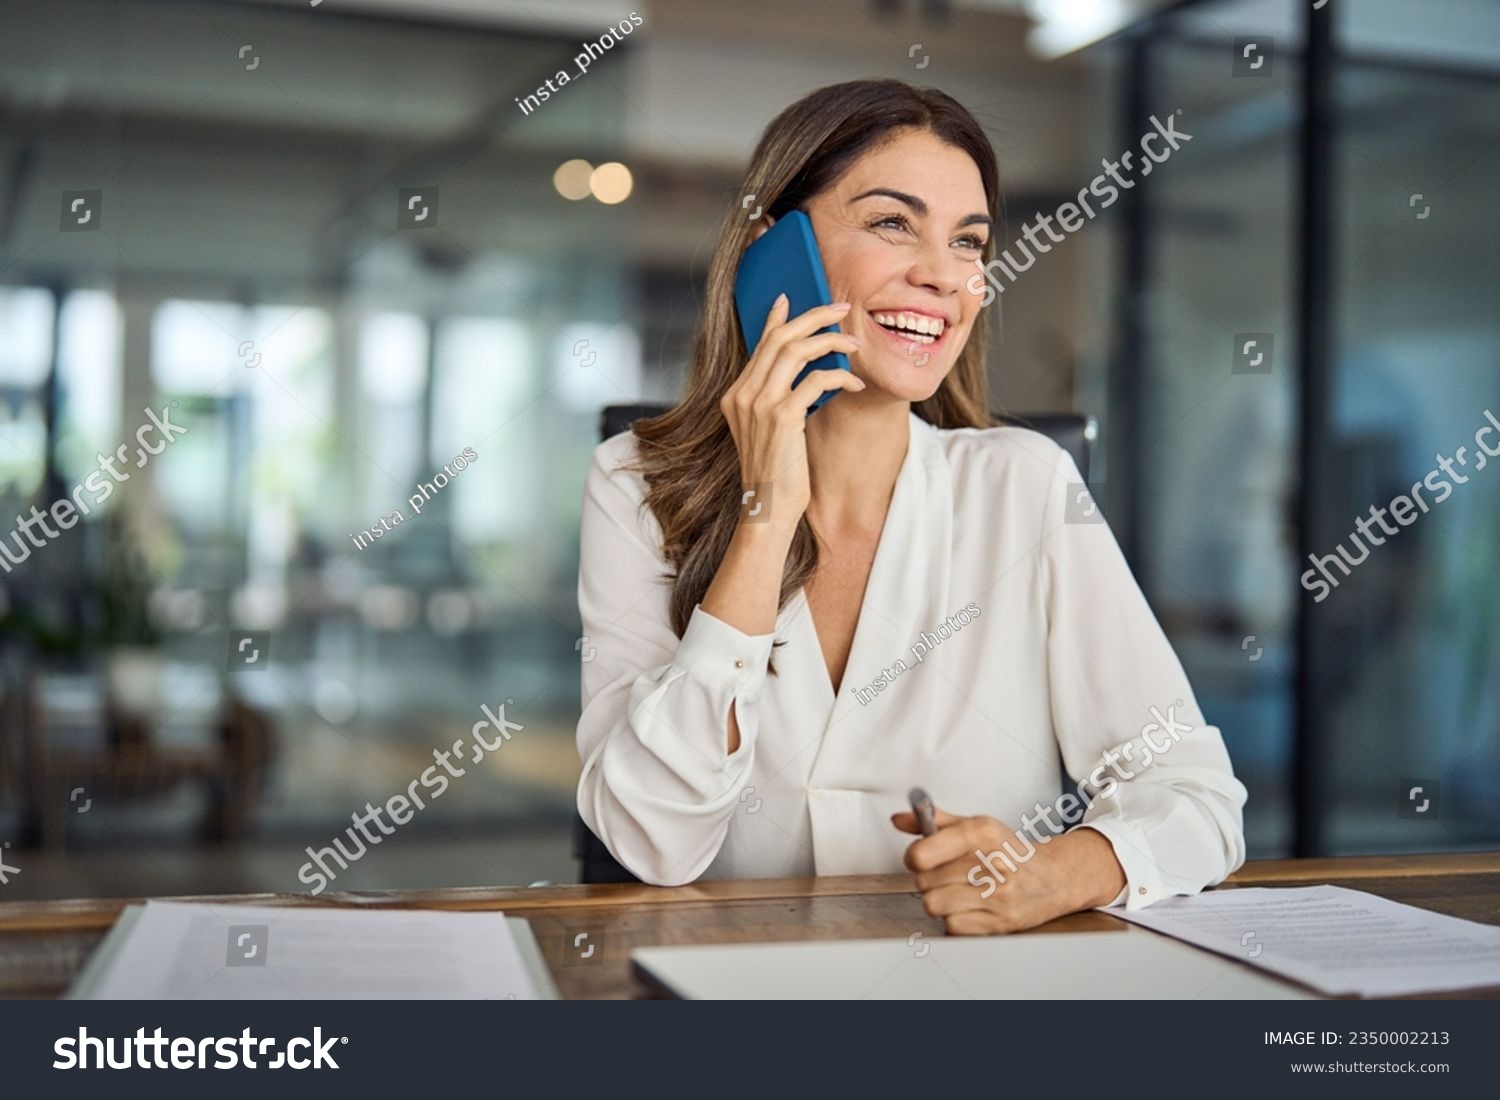 Happy smiling mature mid aged business woman, cheerful 40 years old professional lady executive manager or entrepreneur talking on phone making business call on cellphone at work in office. #2350002213